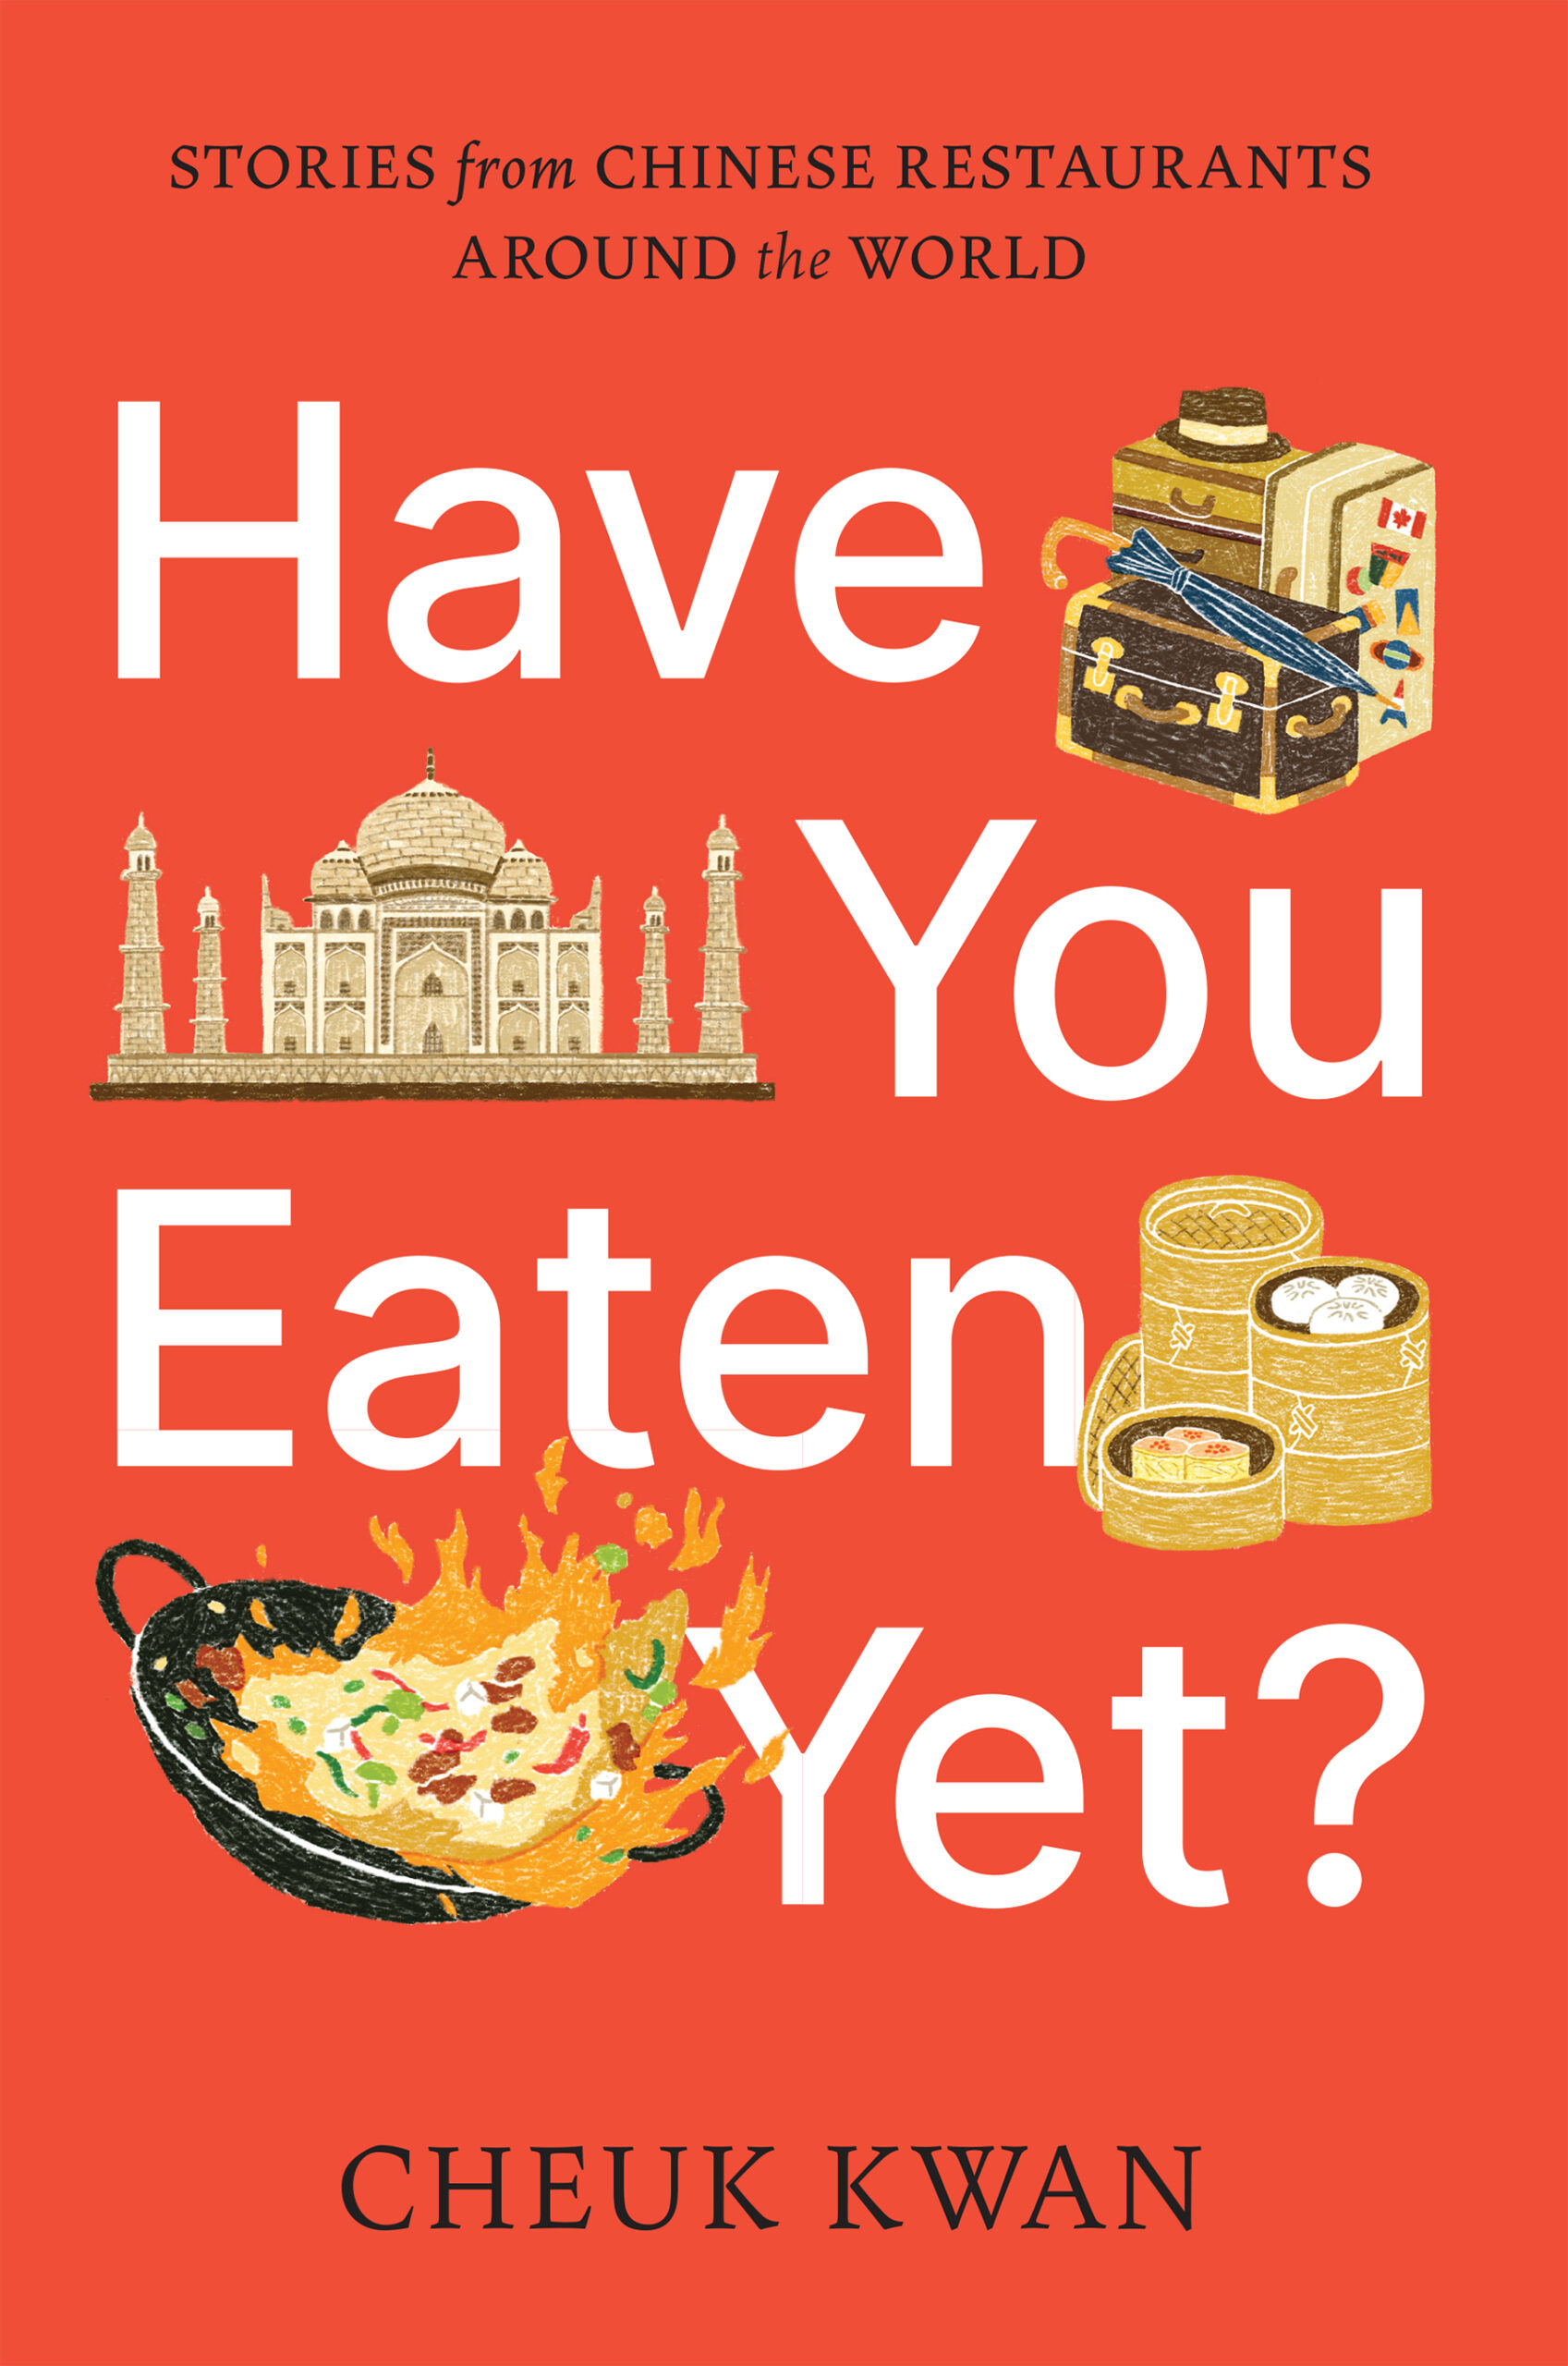 Have You Eaten Yet? by Cheuk Kwan book cover